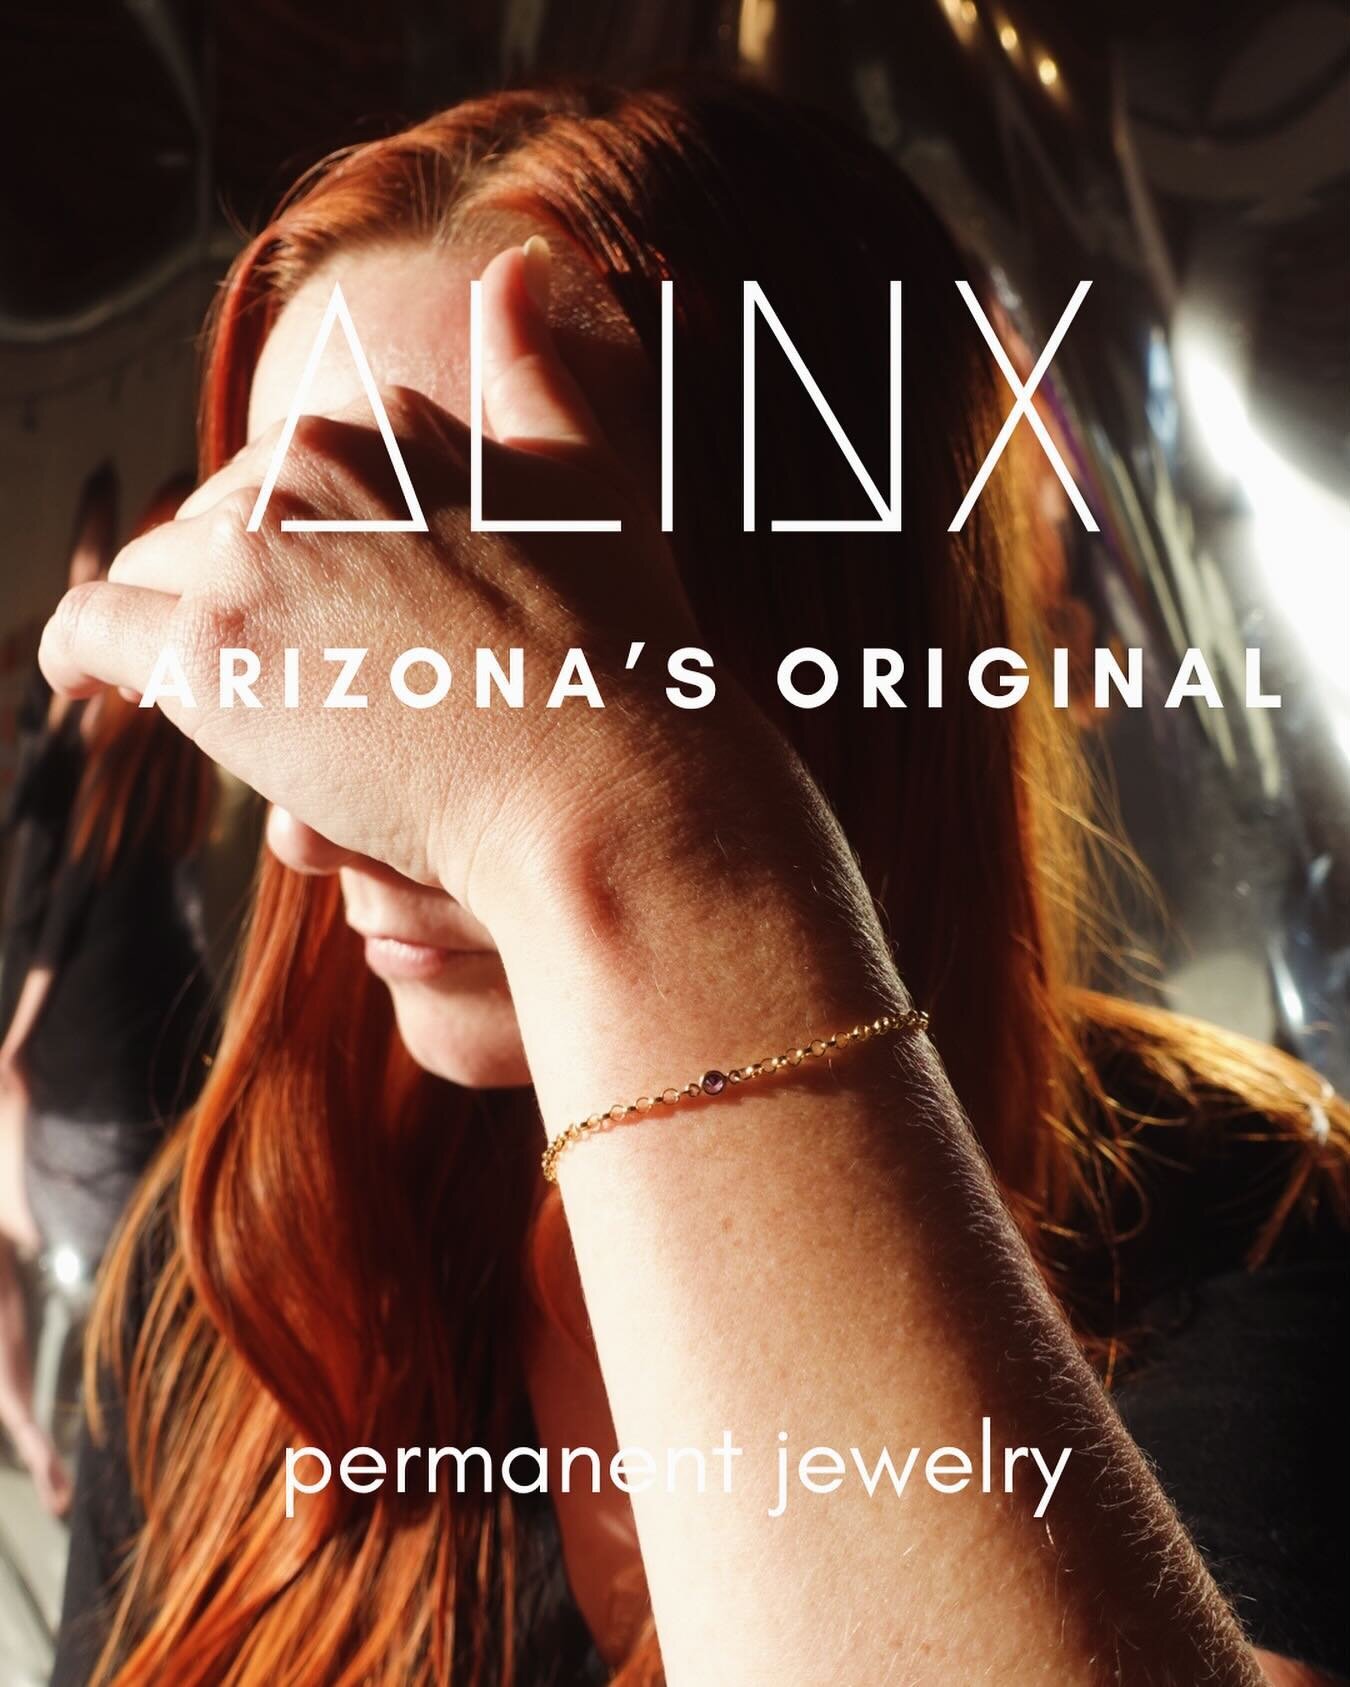 Don&rsquo;t you want to sparkle 💖 with the rest of us?✨Get #linked4life. Book an appointment with Arizona&rsquo;s original permanent jewelry studio. 🌵
#arizona #arizonasbest #jewelry #bracelets #permanentjewelry